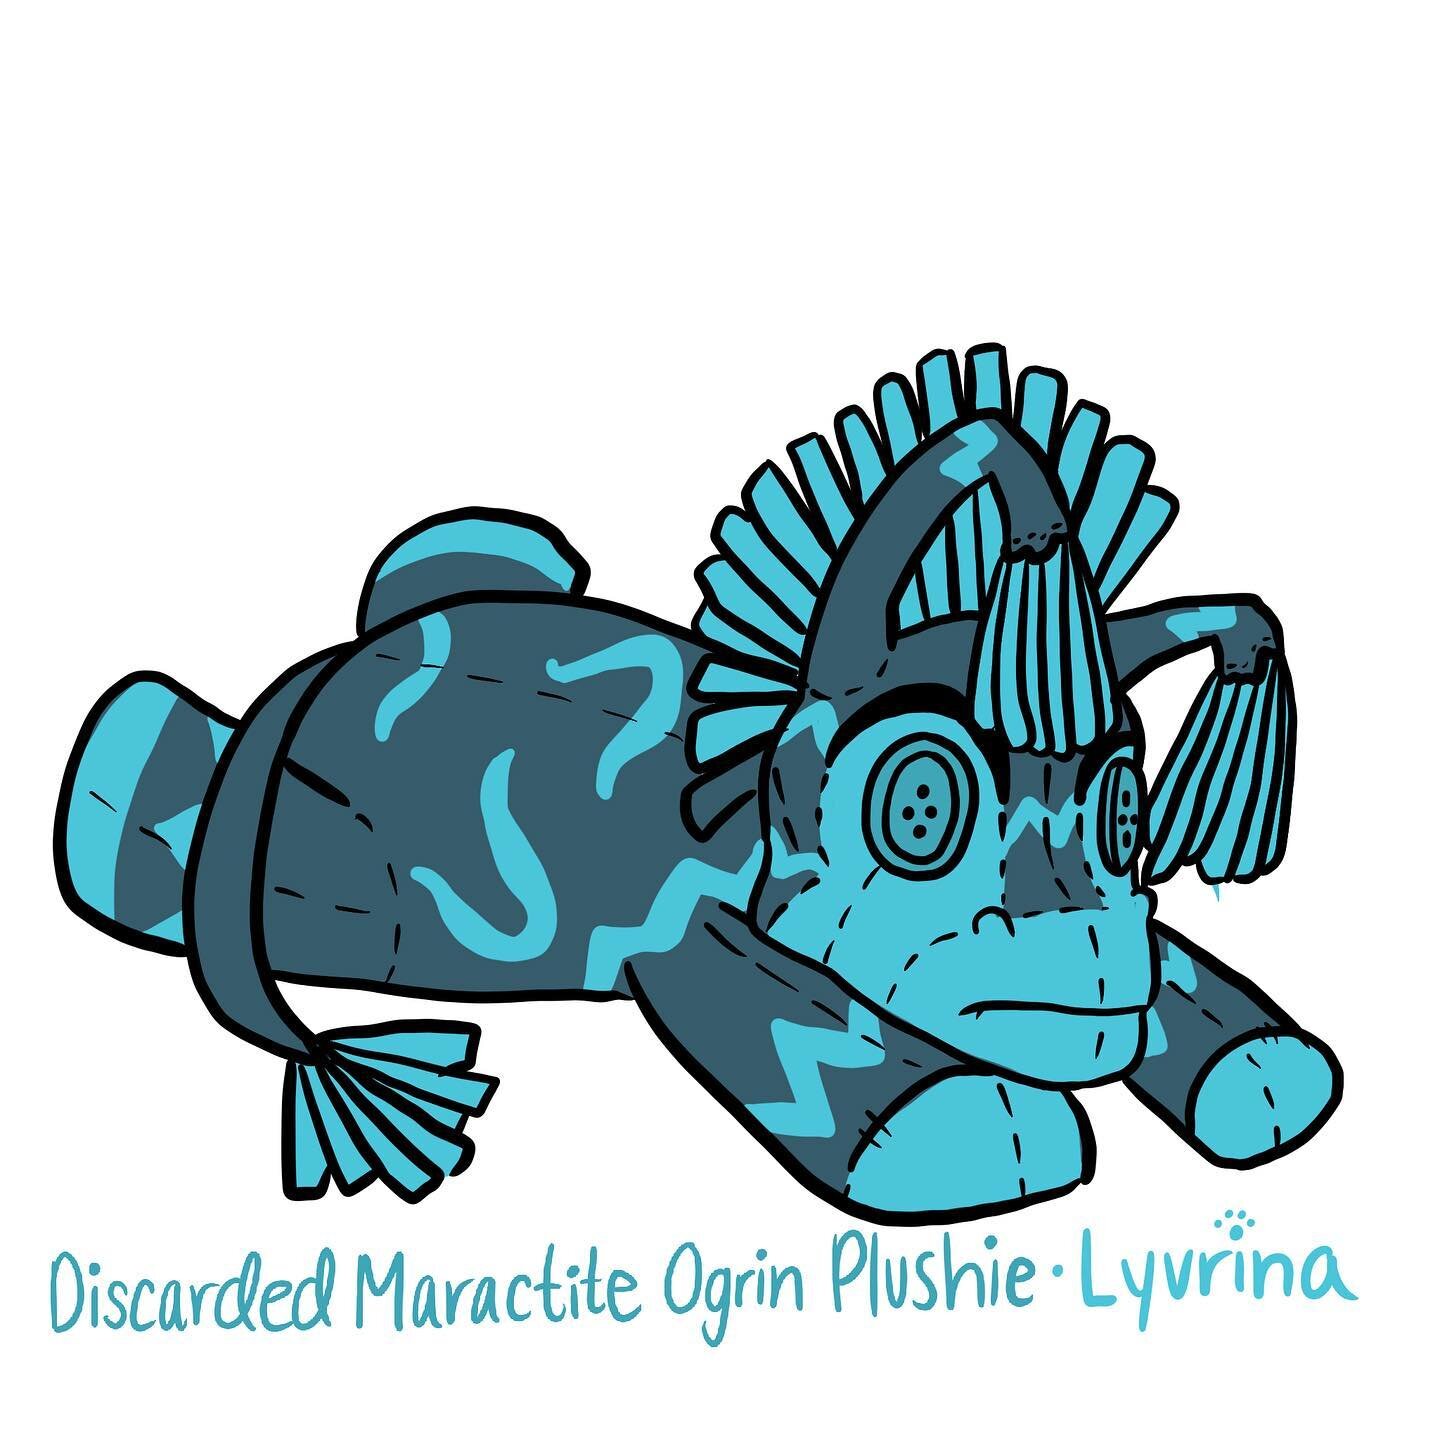 &ldquo;Oh just see how sad this plushie looks.Maybe you should hug it&rdquo;
-
-
I found this poor Discarded Maractite Ogrin Plushie while at the Ye Olde Fishing Vortex. I fished him out and then took him home. At home I dried him out and gave him so